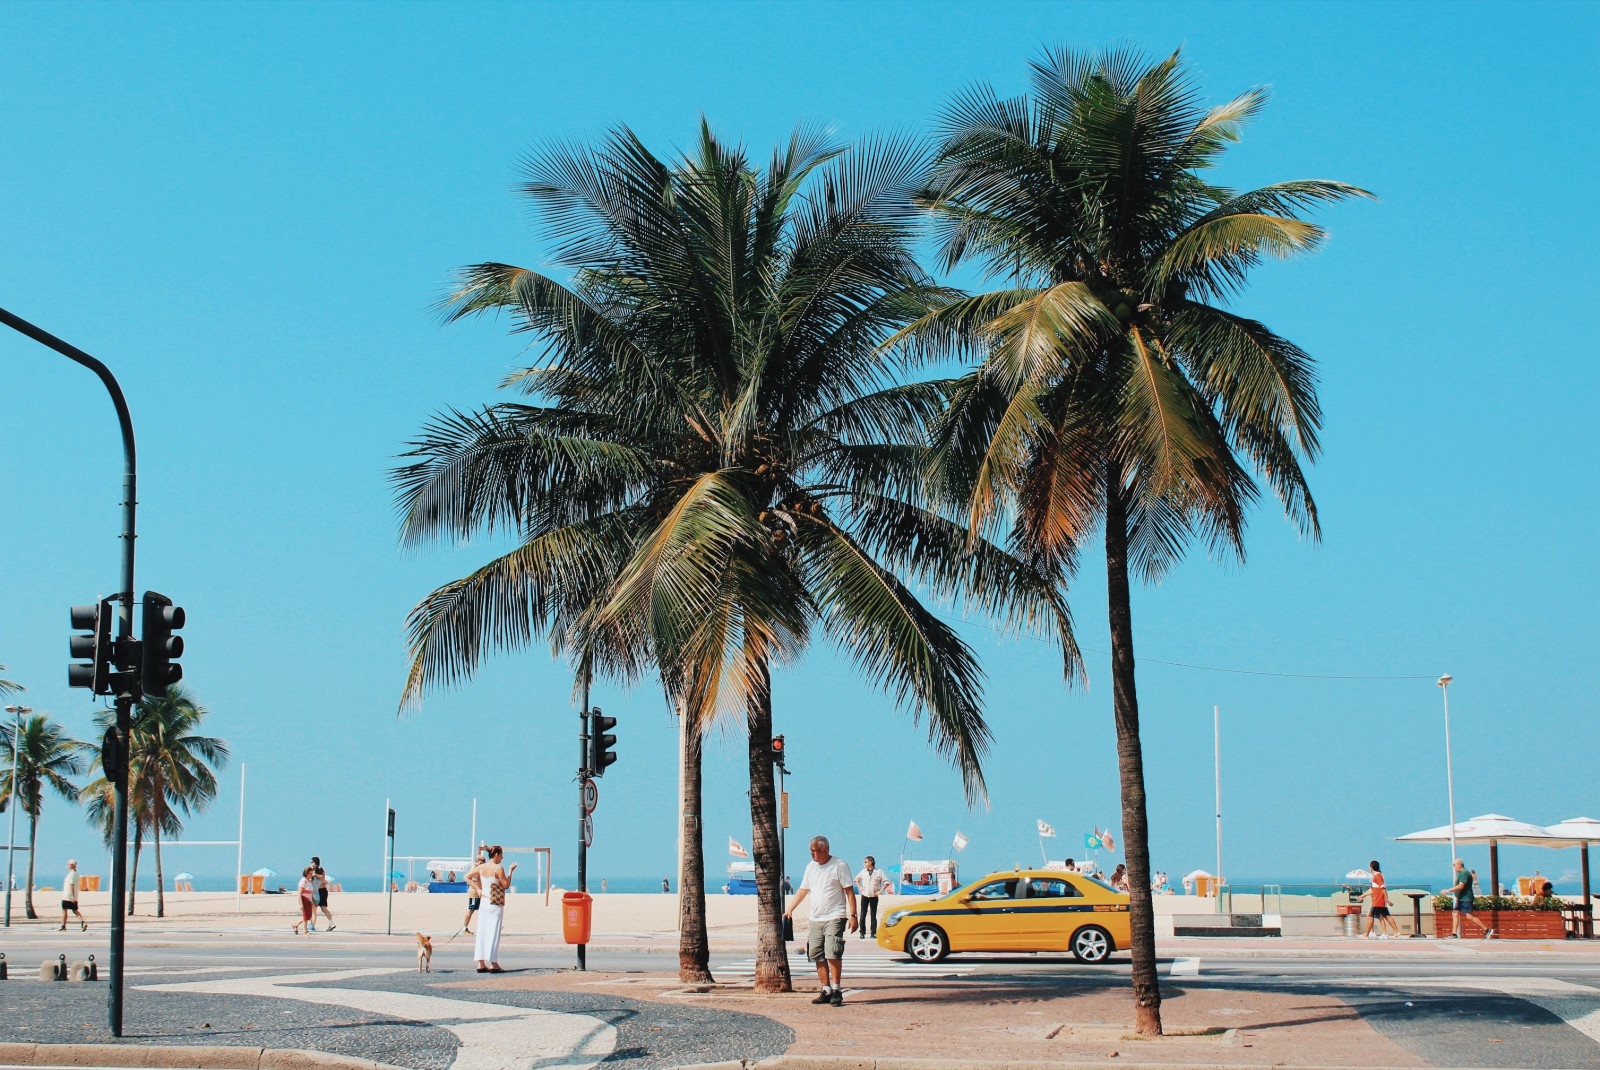 Palm trees, cars and pedestrians by the beach in Copacabana, Brazil